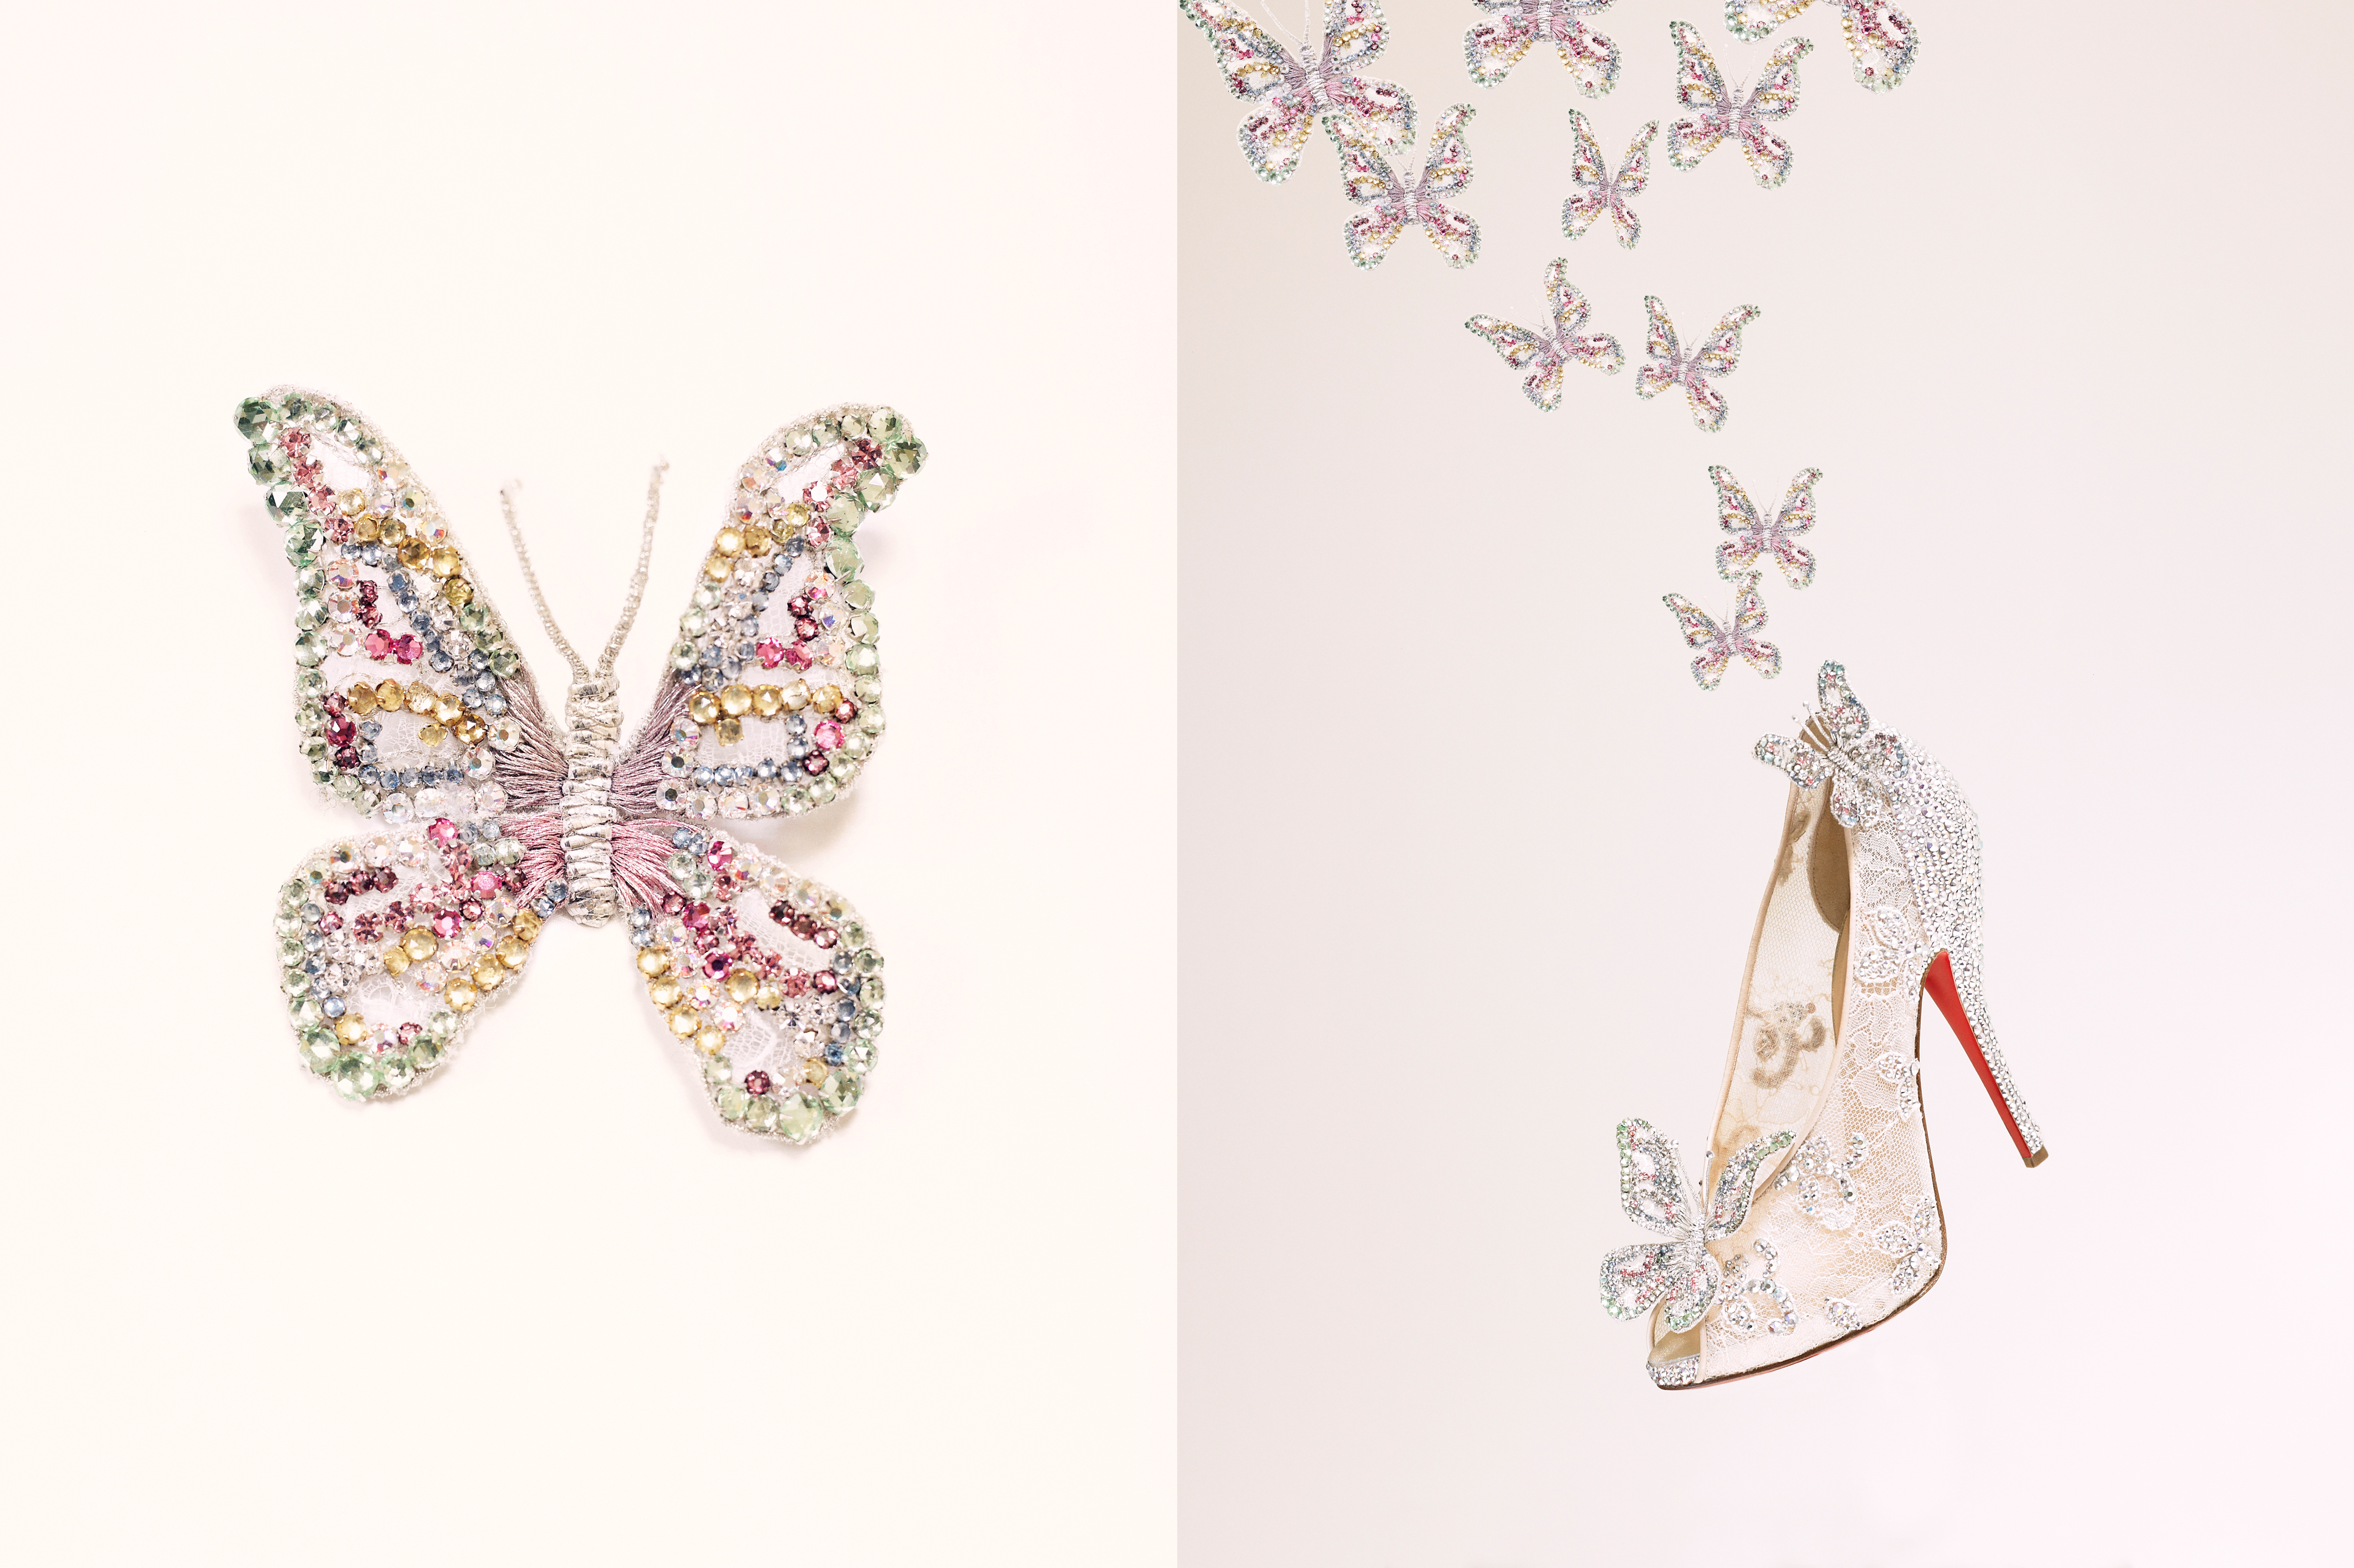 Christian Louboutin Makes Fantasies Come True With The New Cinderella  Slipper